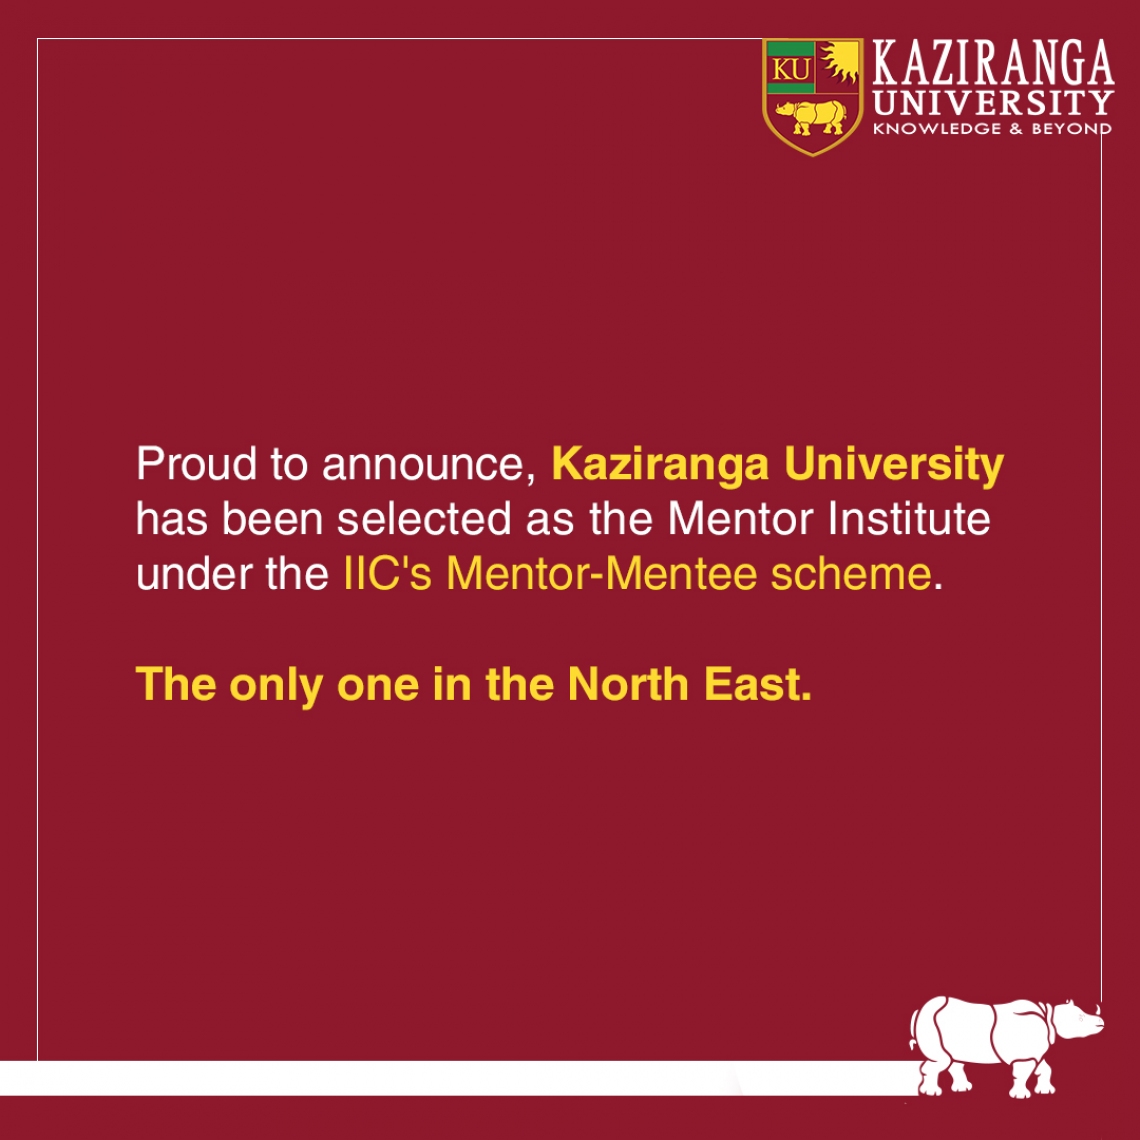 Kaziranga University, selected as the Mentor Institue under IIC's Mentor-Mentee program.The only institute in the North East.